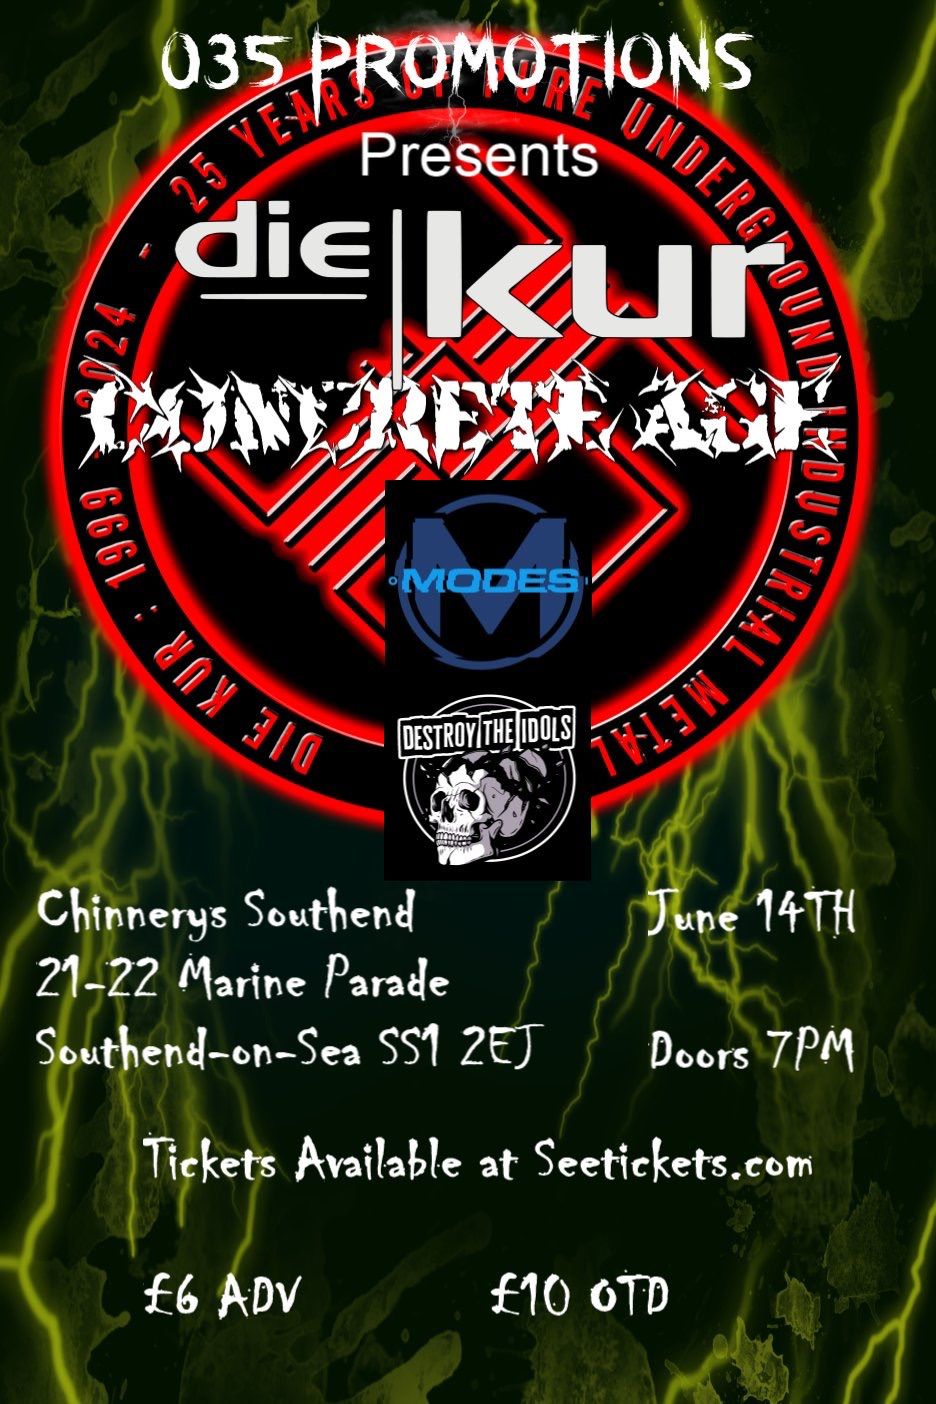 Live with Die Kur, Concrete Age, Modes and Destroy The Idols 